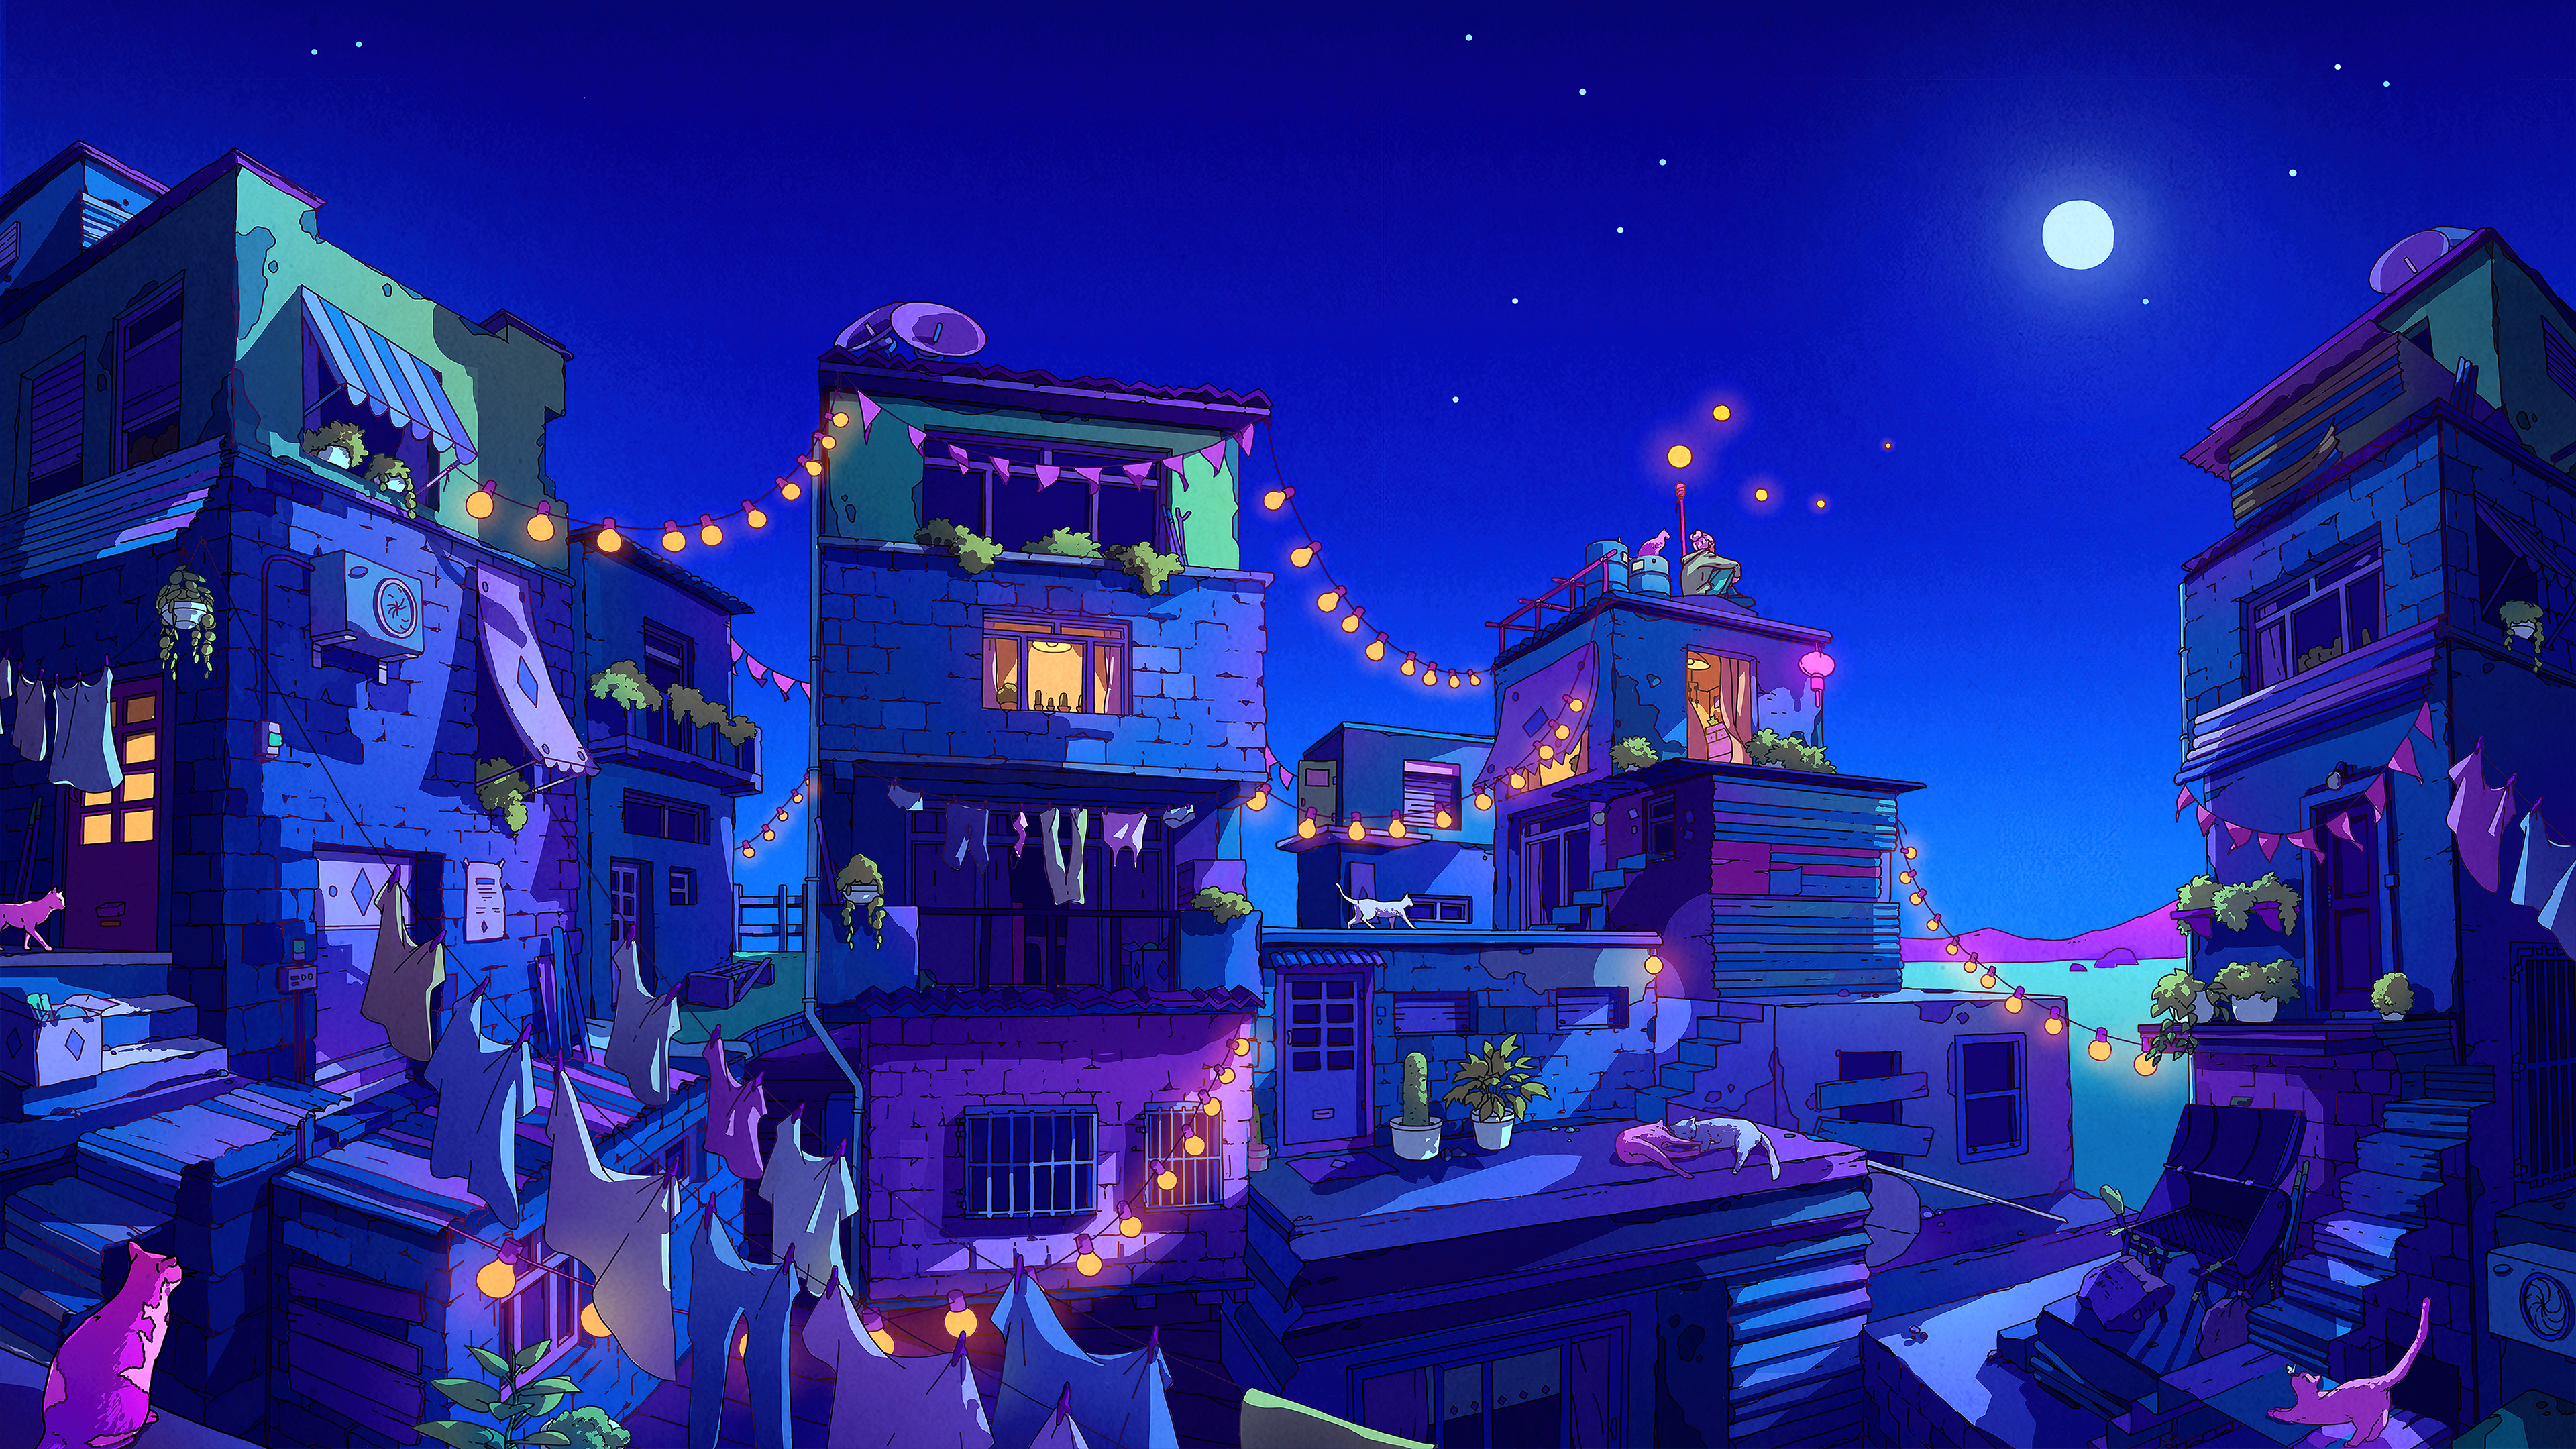 General 3840x2160 digital art night Moon stars clothes house artwork building Townscape